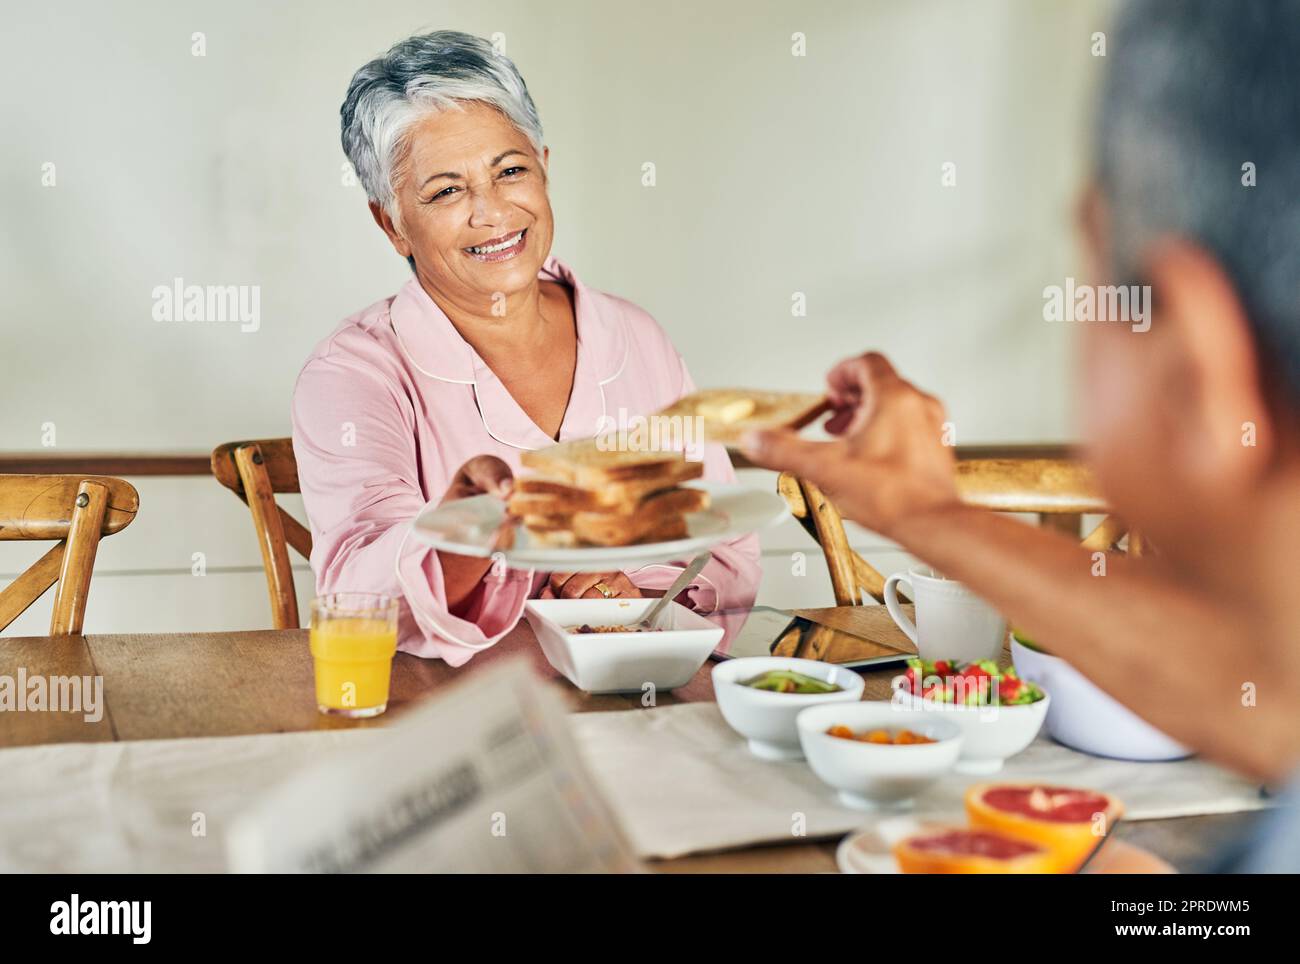 Would you like another one. a cheerful elderly woman handing over a plate of toast to her husband during breakfast at home. Stock Photo